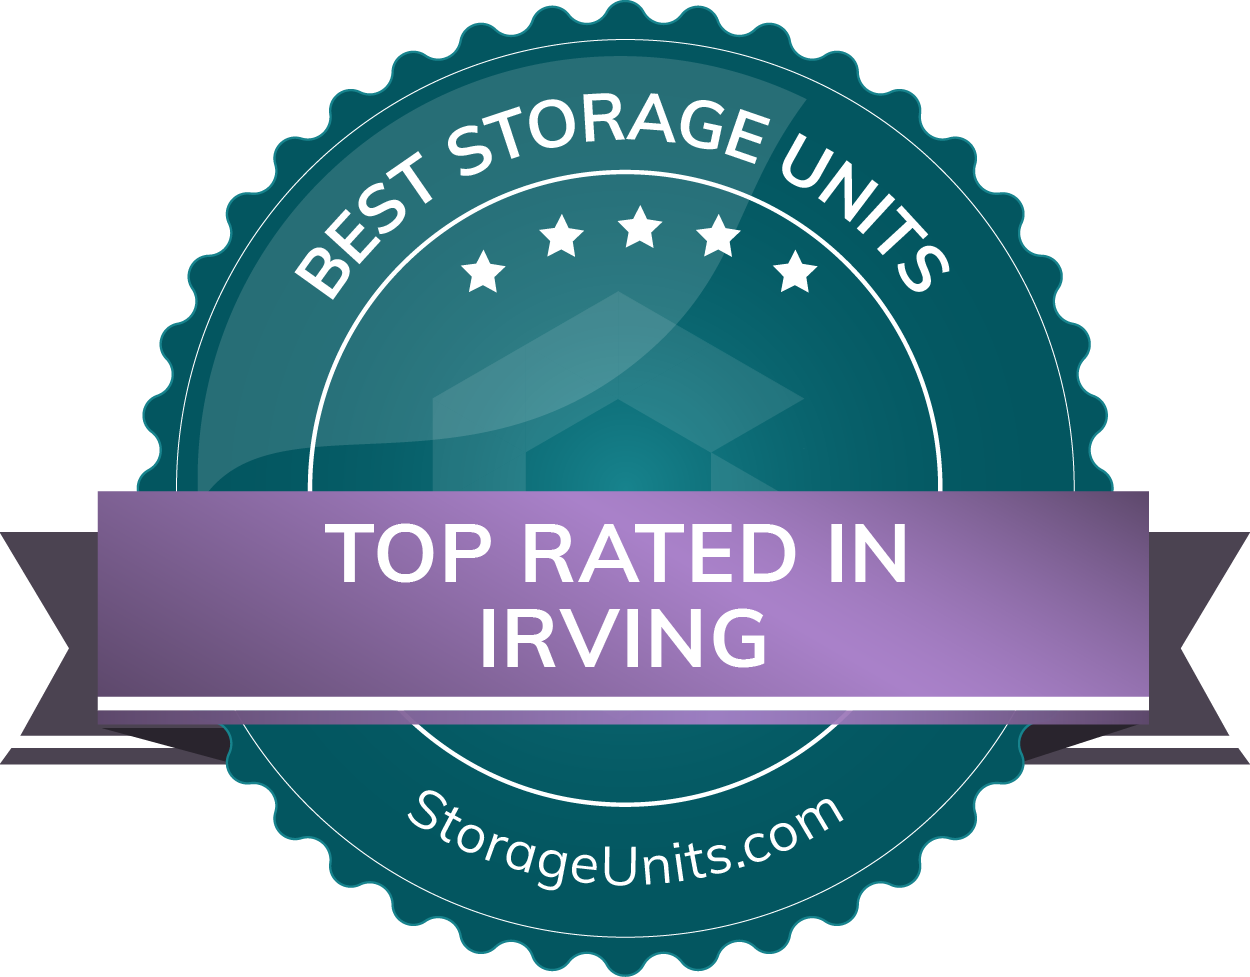 Best Self Storage Units in Irving, Texas of 2022